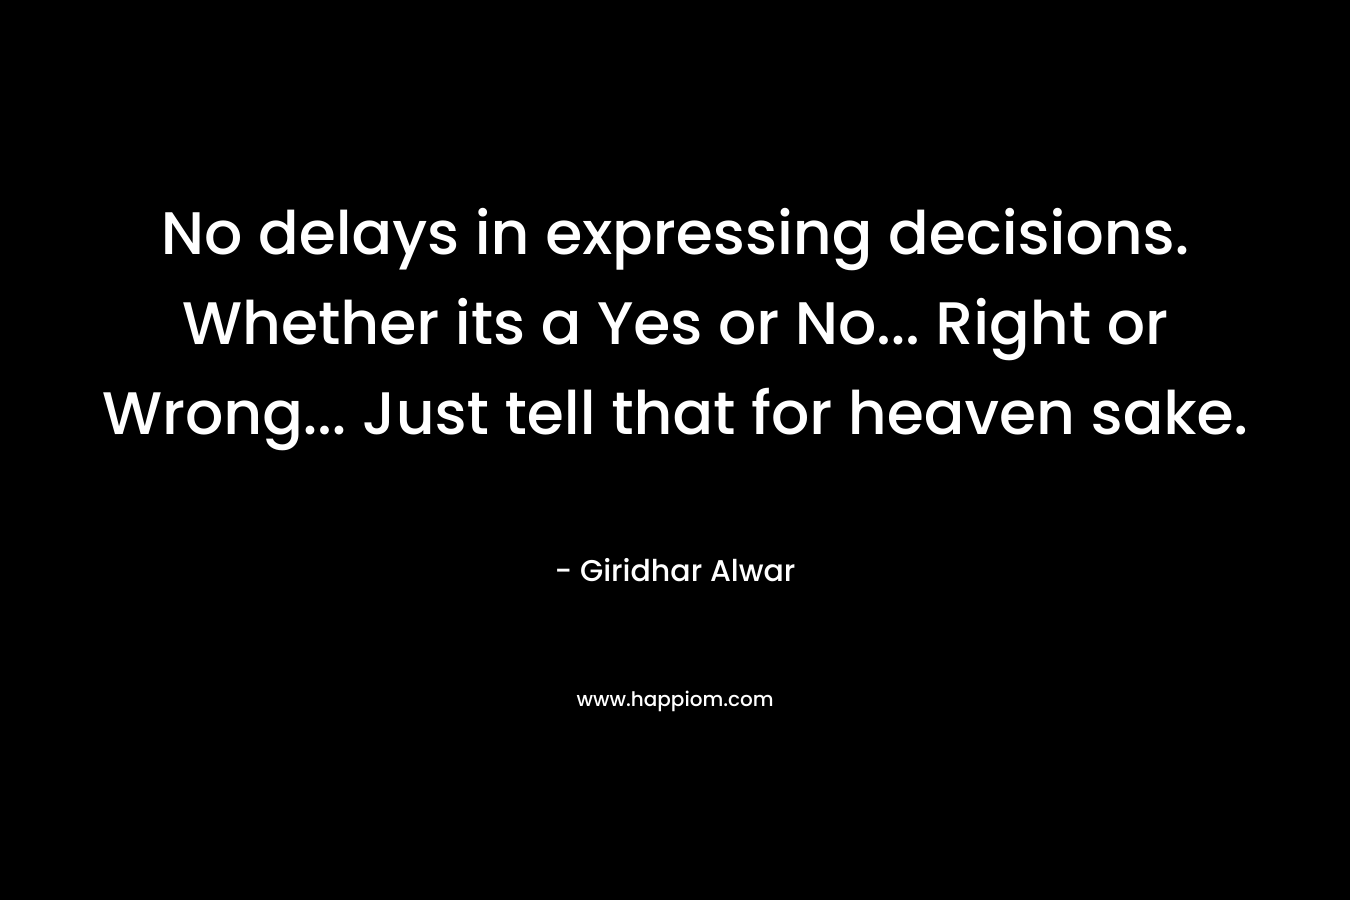 No delays in expressing decisions. Whether its a Yes or No... Right or Wrong... Just tell that for heaven sake.